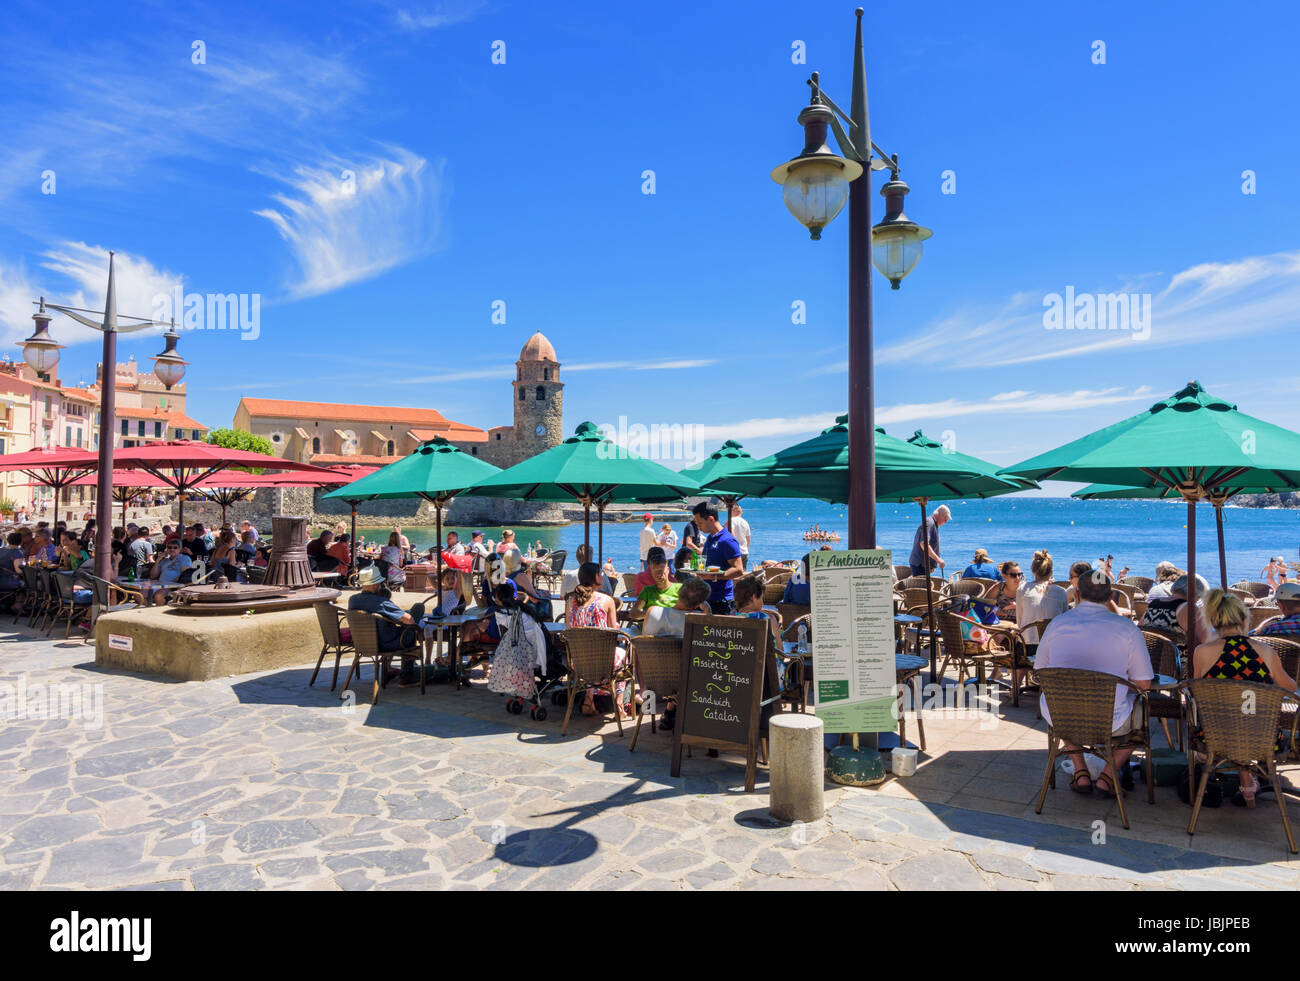 Busy cafe lined waterfront of Collioure Town overlooked by the bell tower of the Church of Notre Dame des Anges, Collioure, Côte Vermeille, France Stock Photo